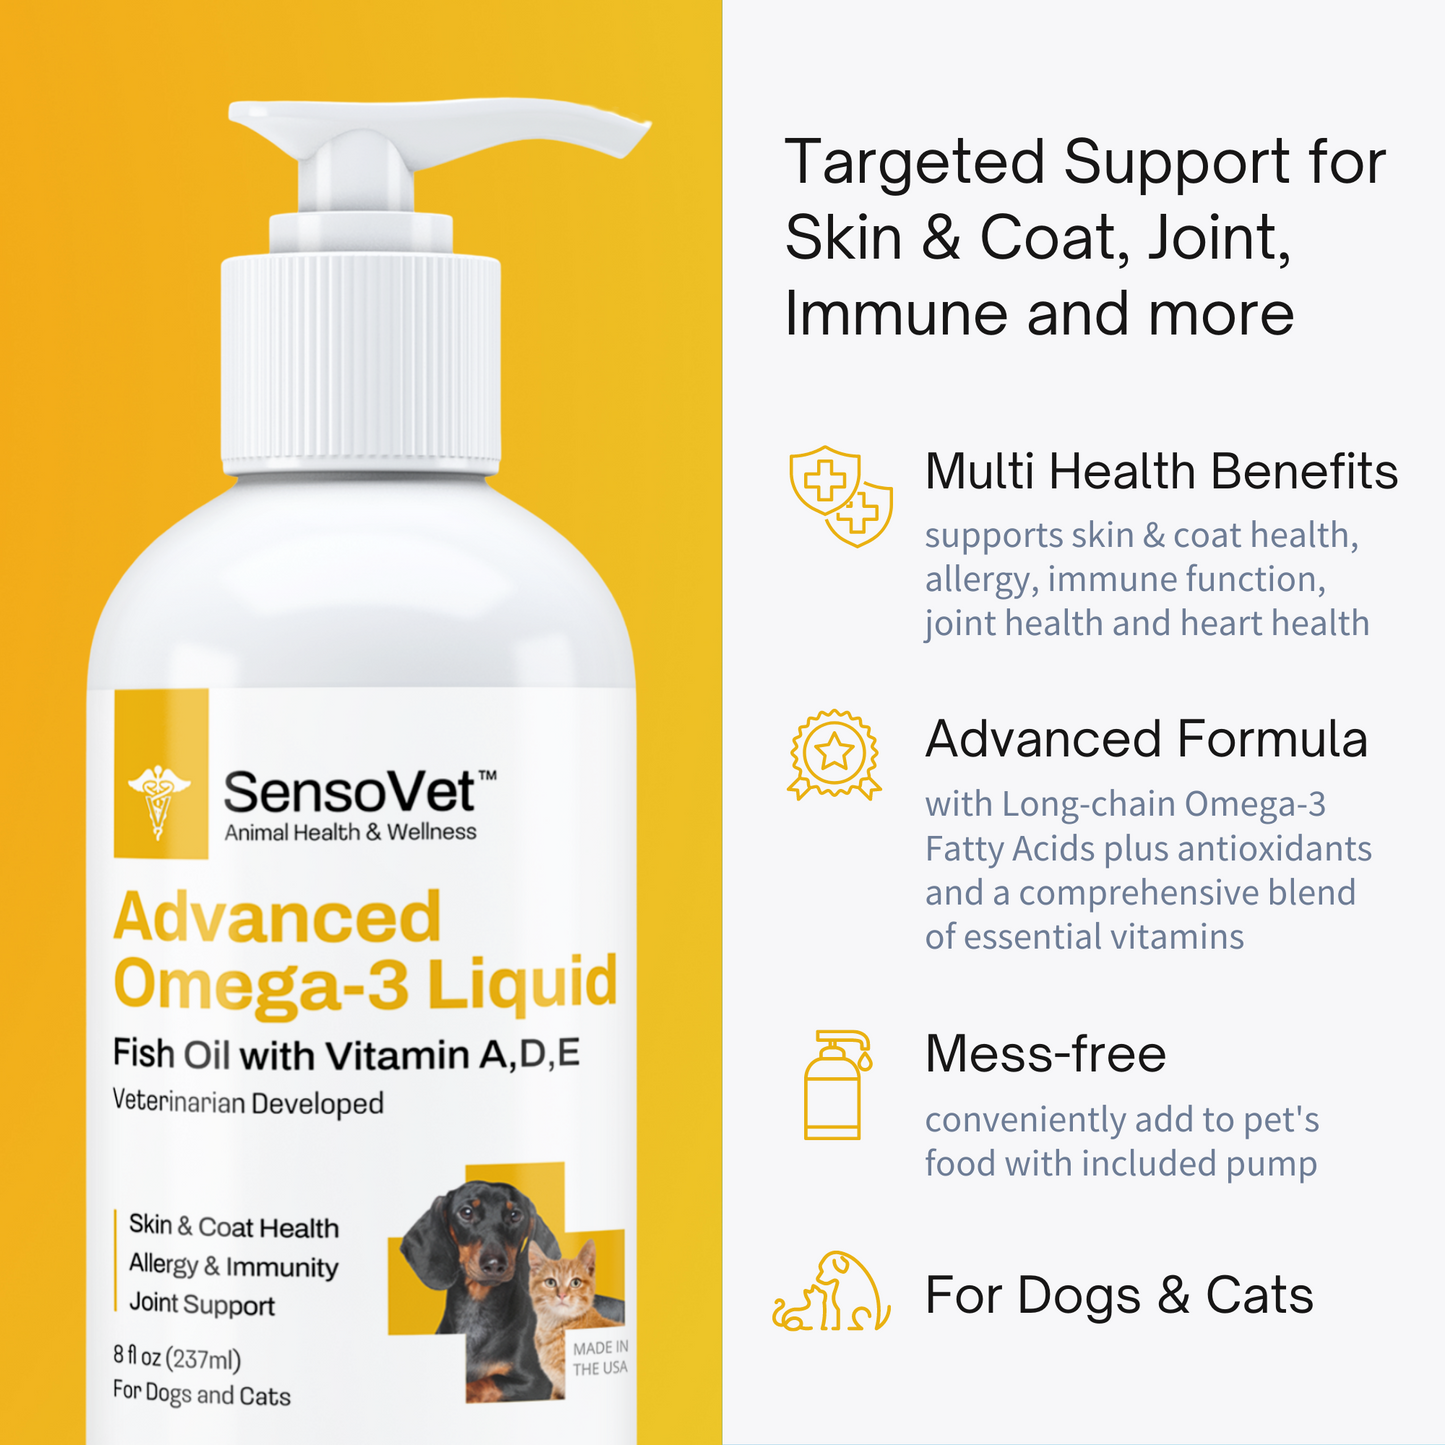 Advanced Omega-3 Liquid for Dogs & Cats - Fish Oil with Vitamins - 12oz